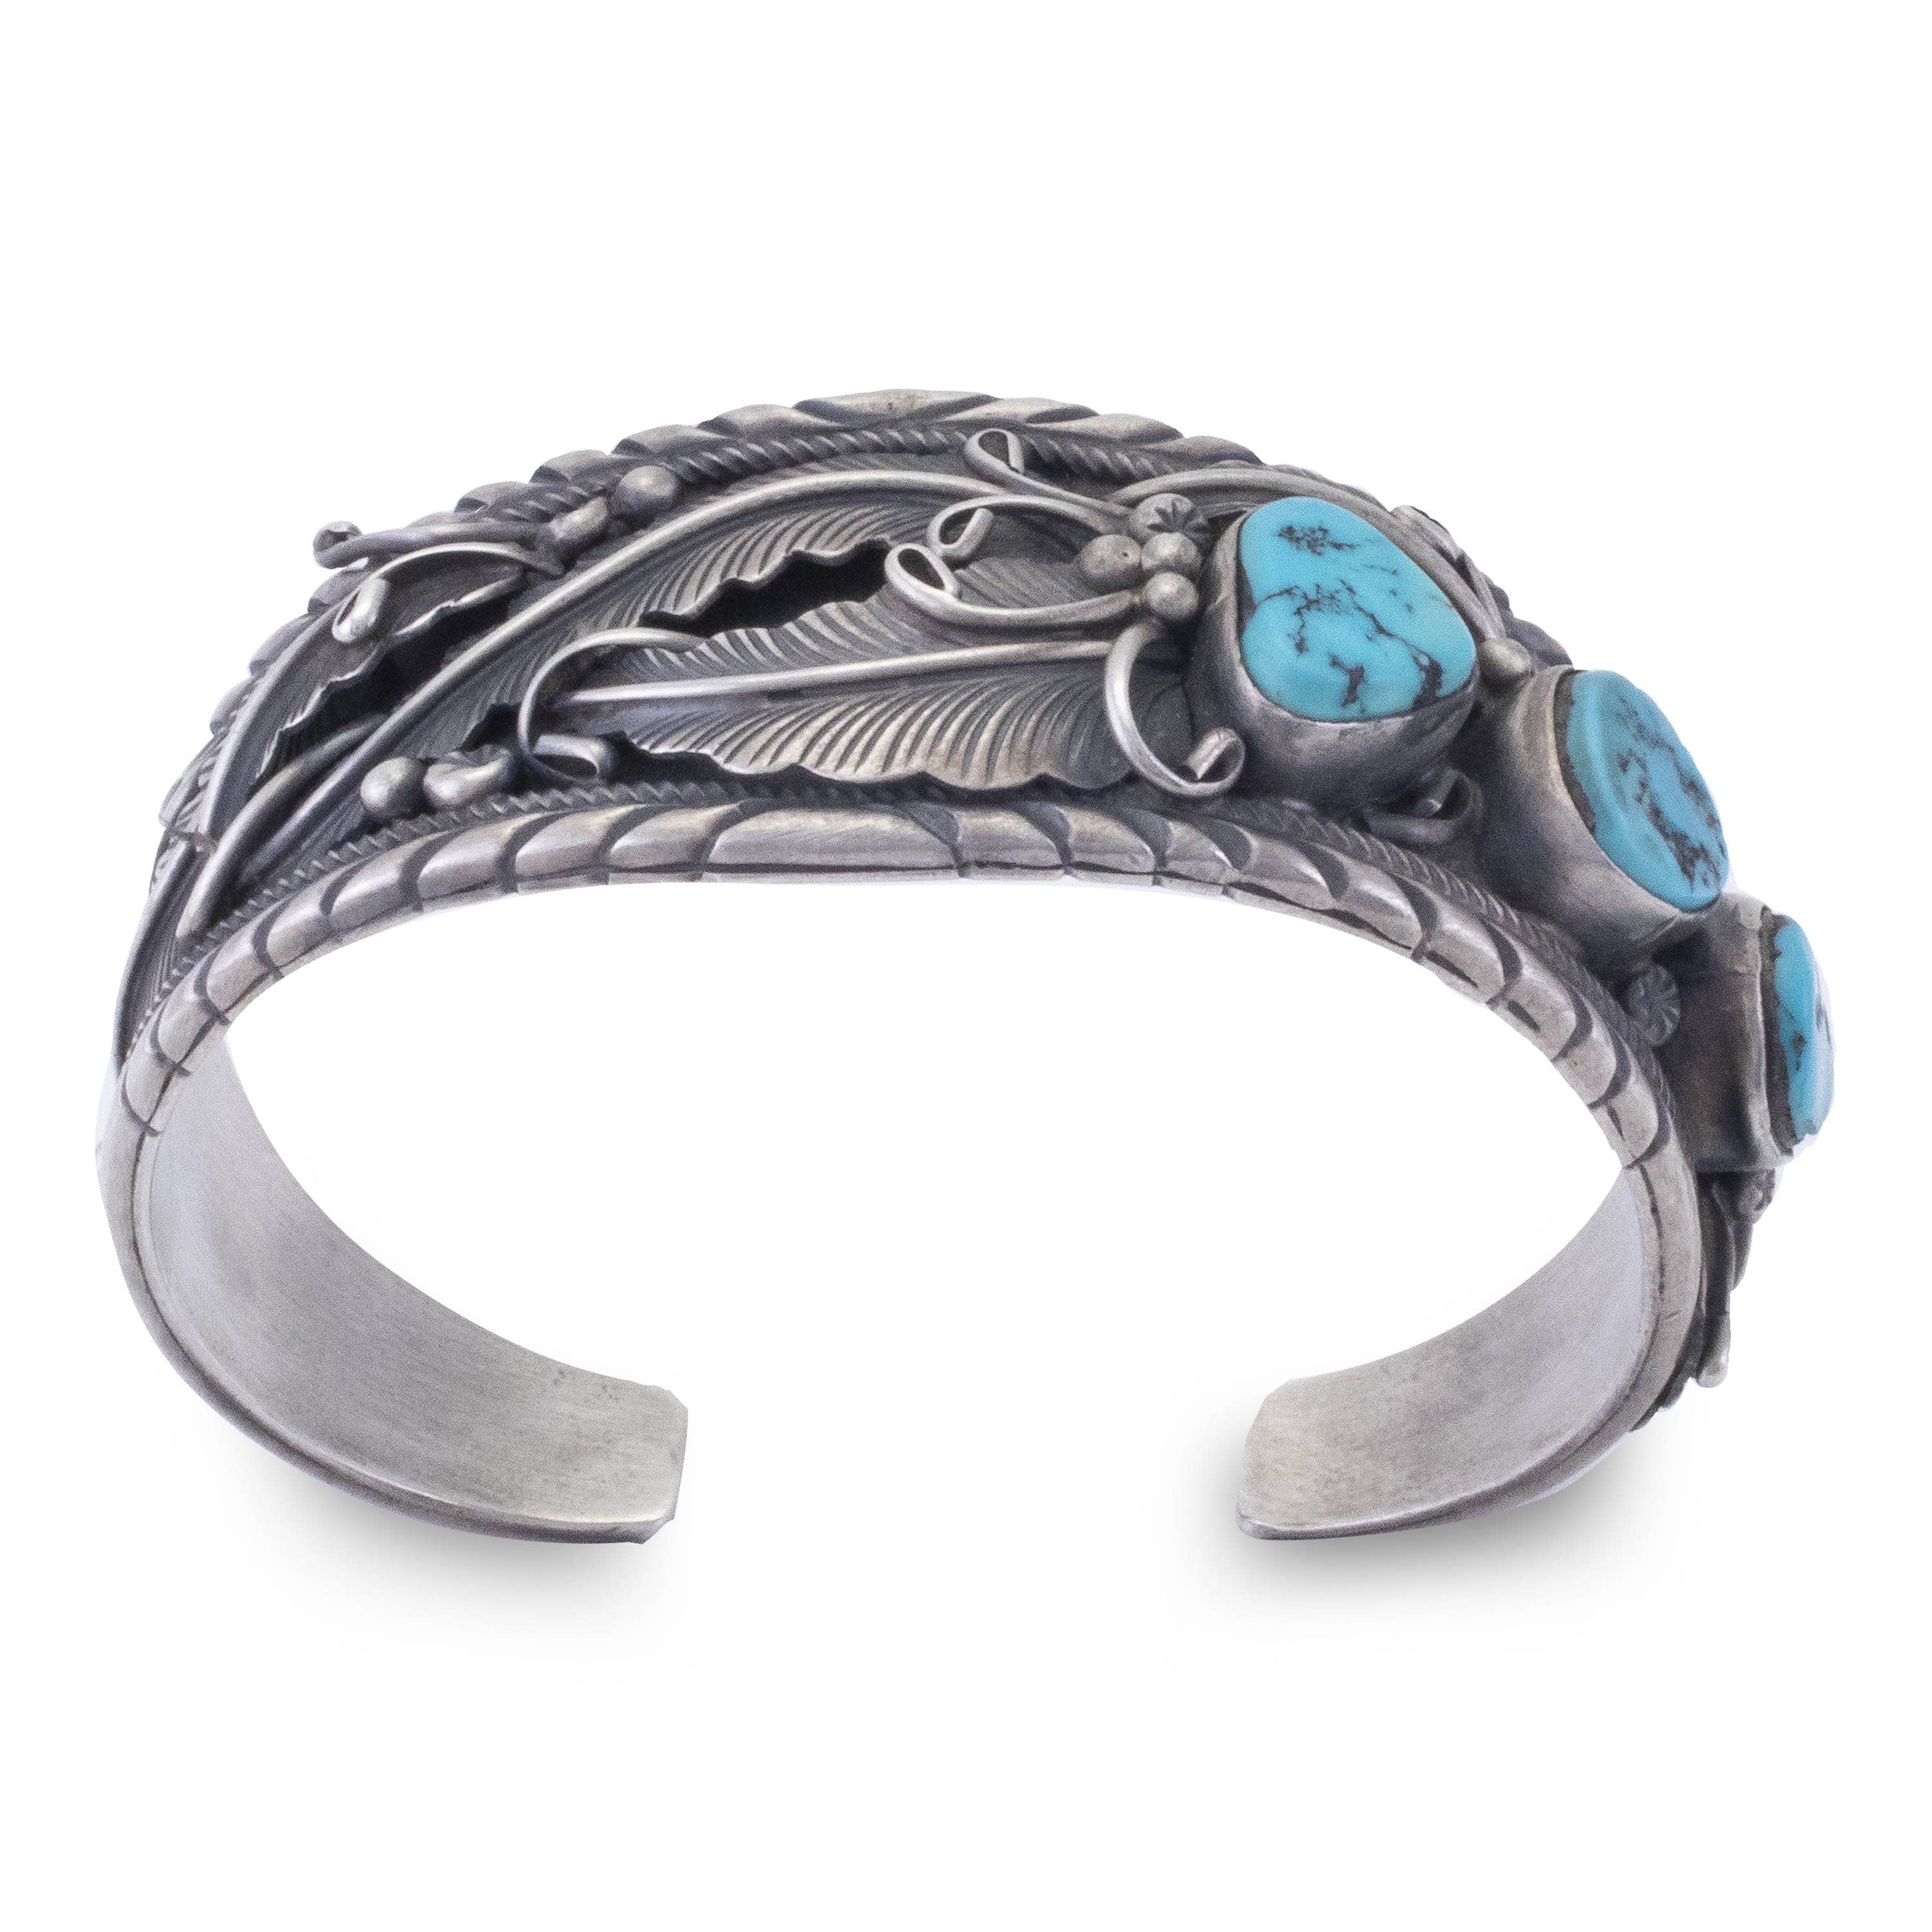 Kalifano Native American Jewelry Marvin Spencer Navajo Kingman Turquoise USA Native American Made 925 Sterling Silver Cuff NAB900.009